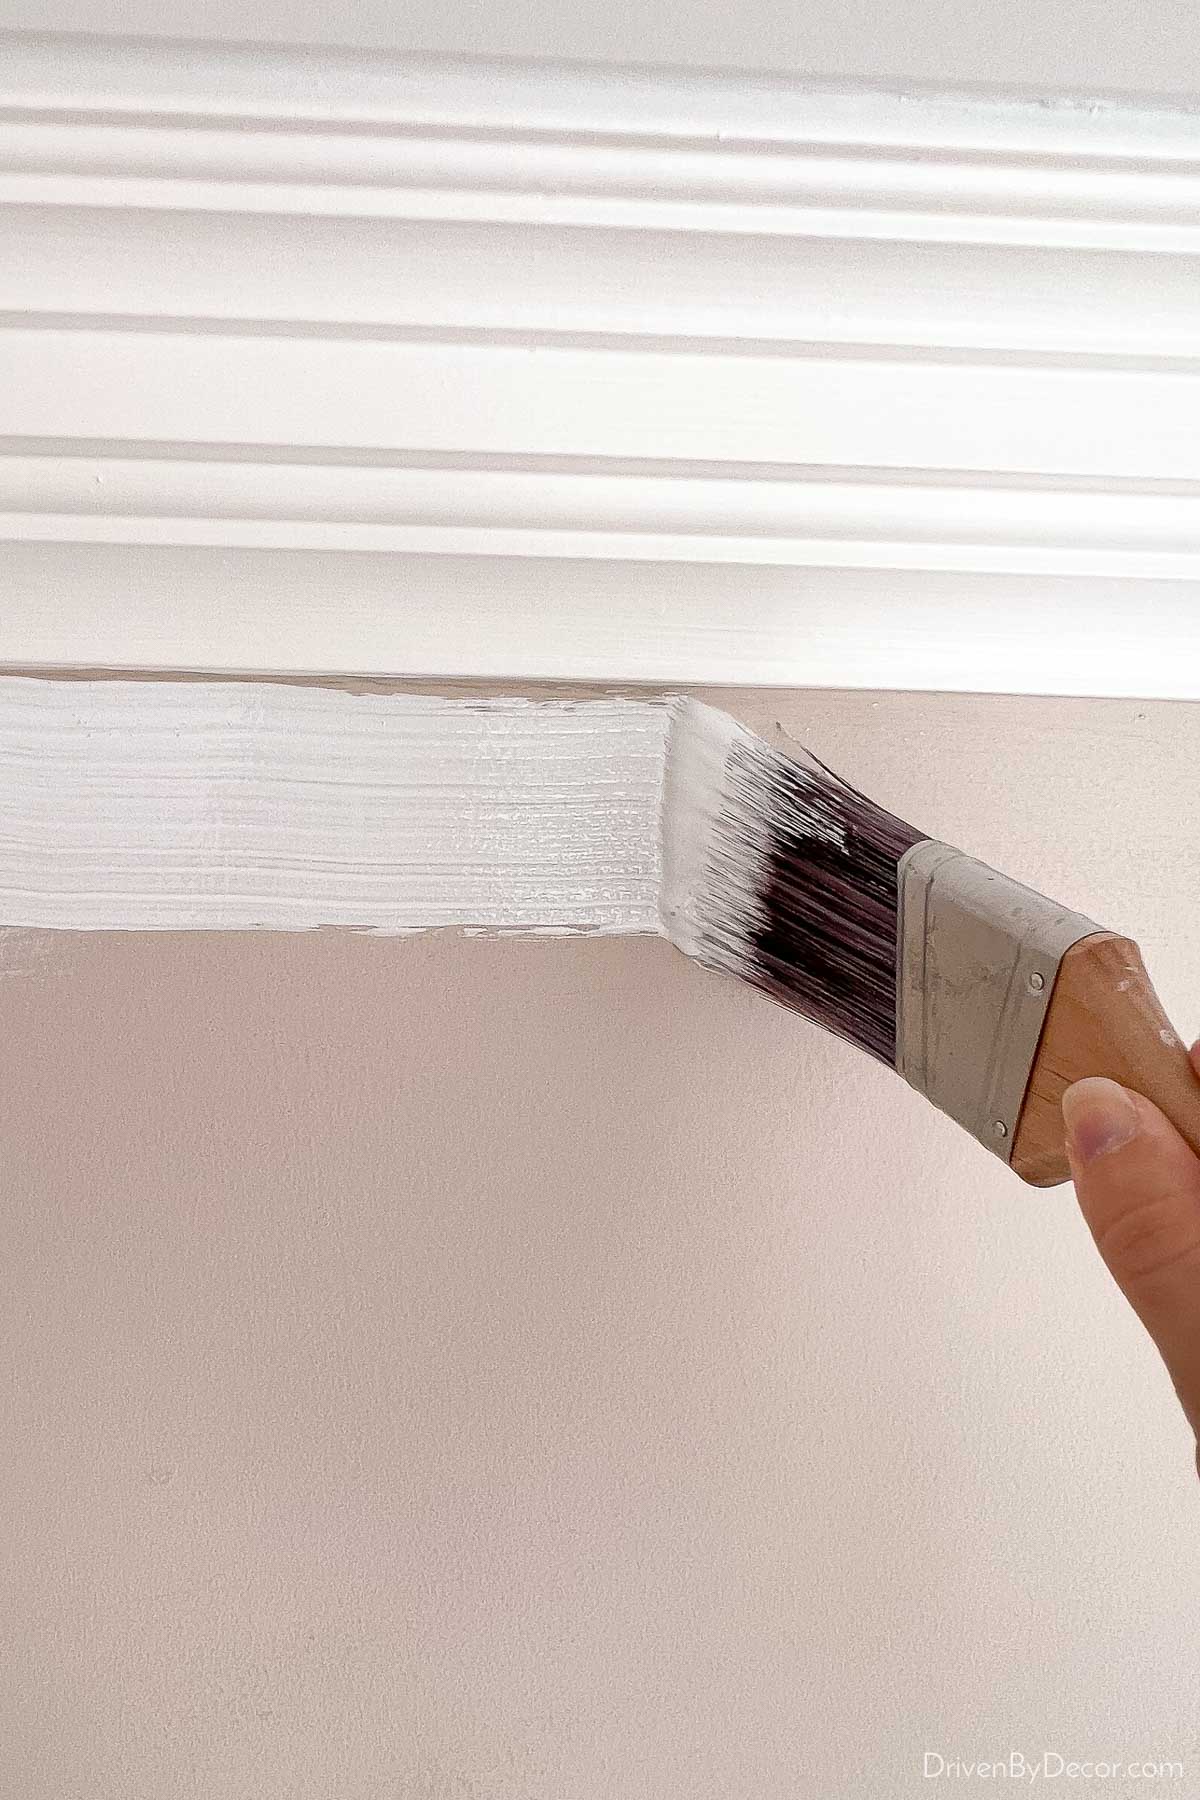 How to edge with paint when painting a room